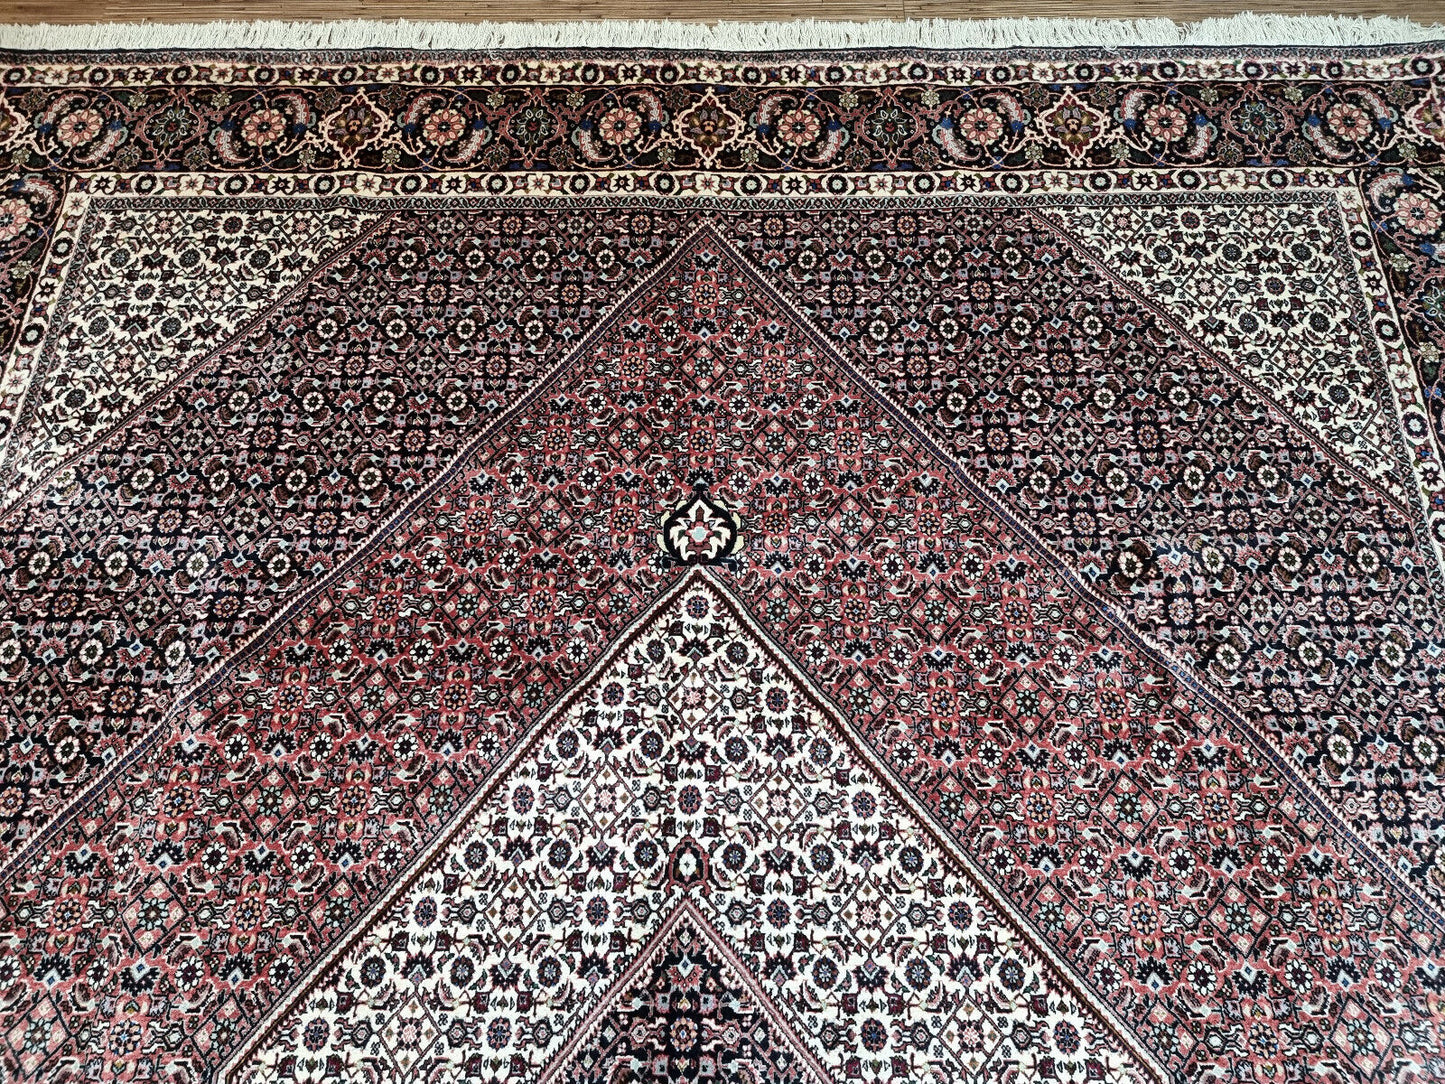 Close-up of broad ornate borders on Handmade Vintage Persian Bidjar Rug - Detailed view showcasing the intricate borders framing the central motif.